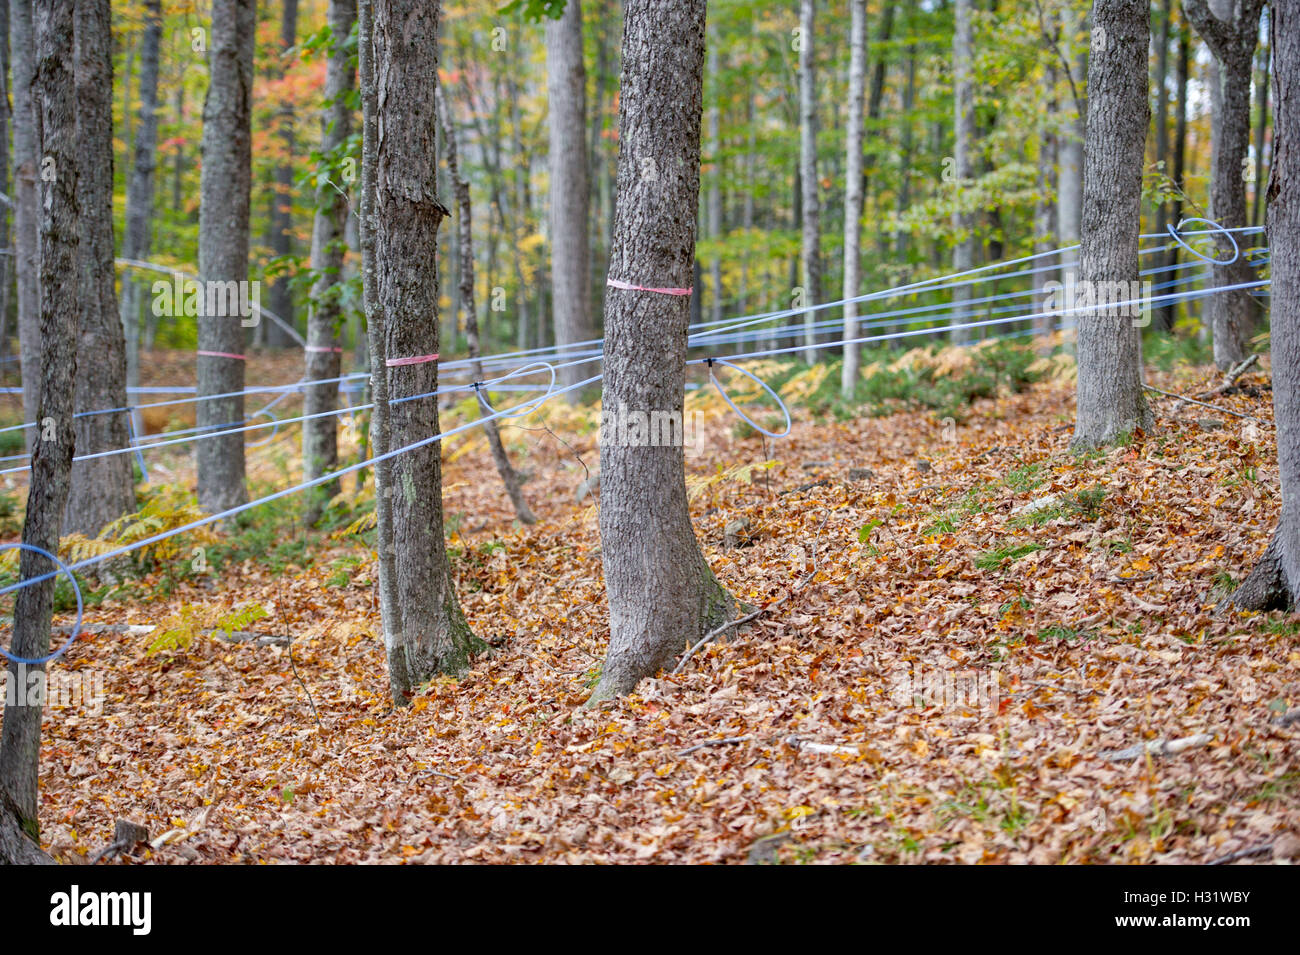 Taps set up in maple trees using plastic tubing to collect sap for maple syrup in Gorham, Maine. Stock Photo